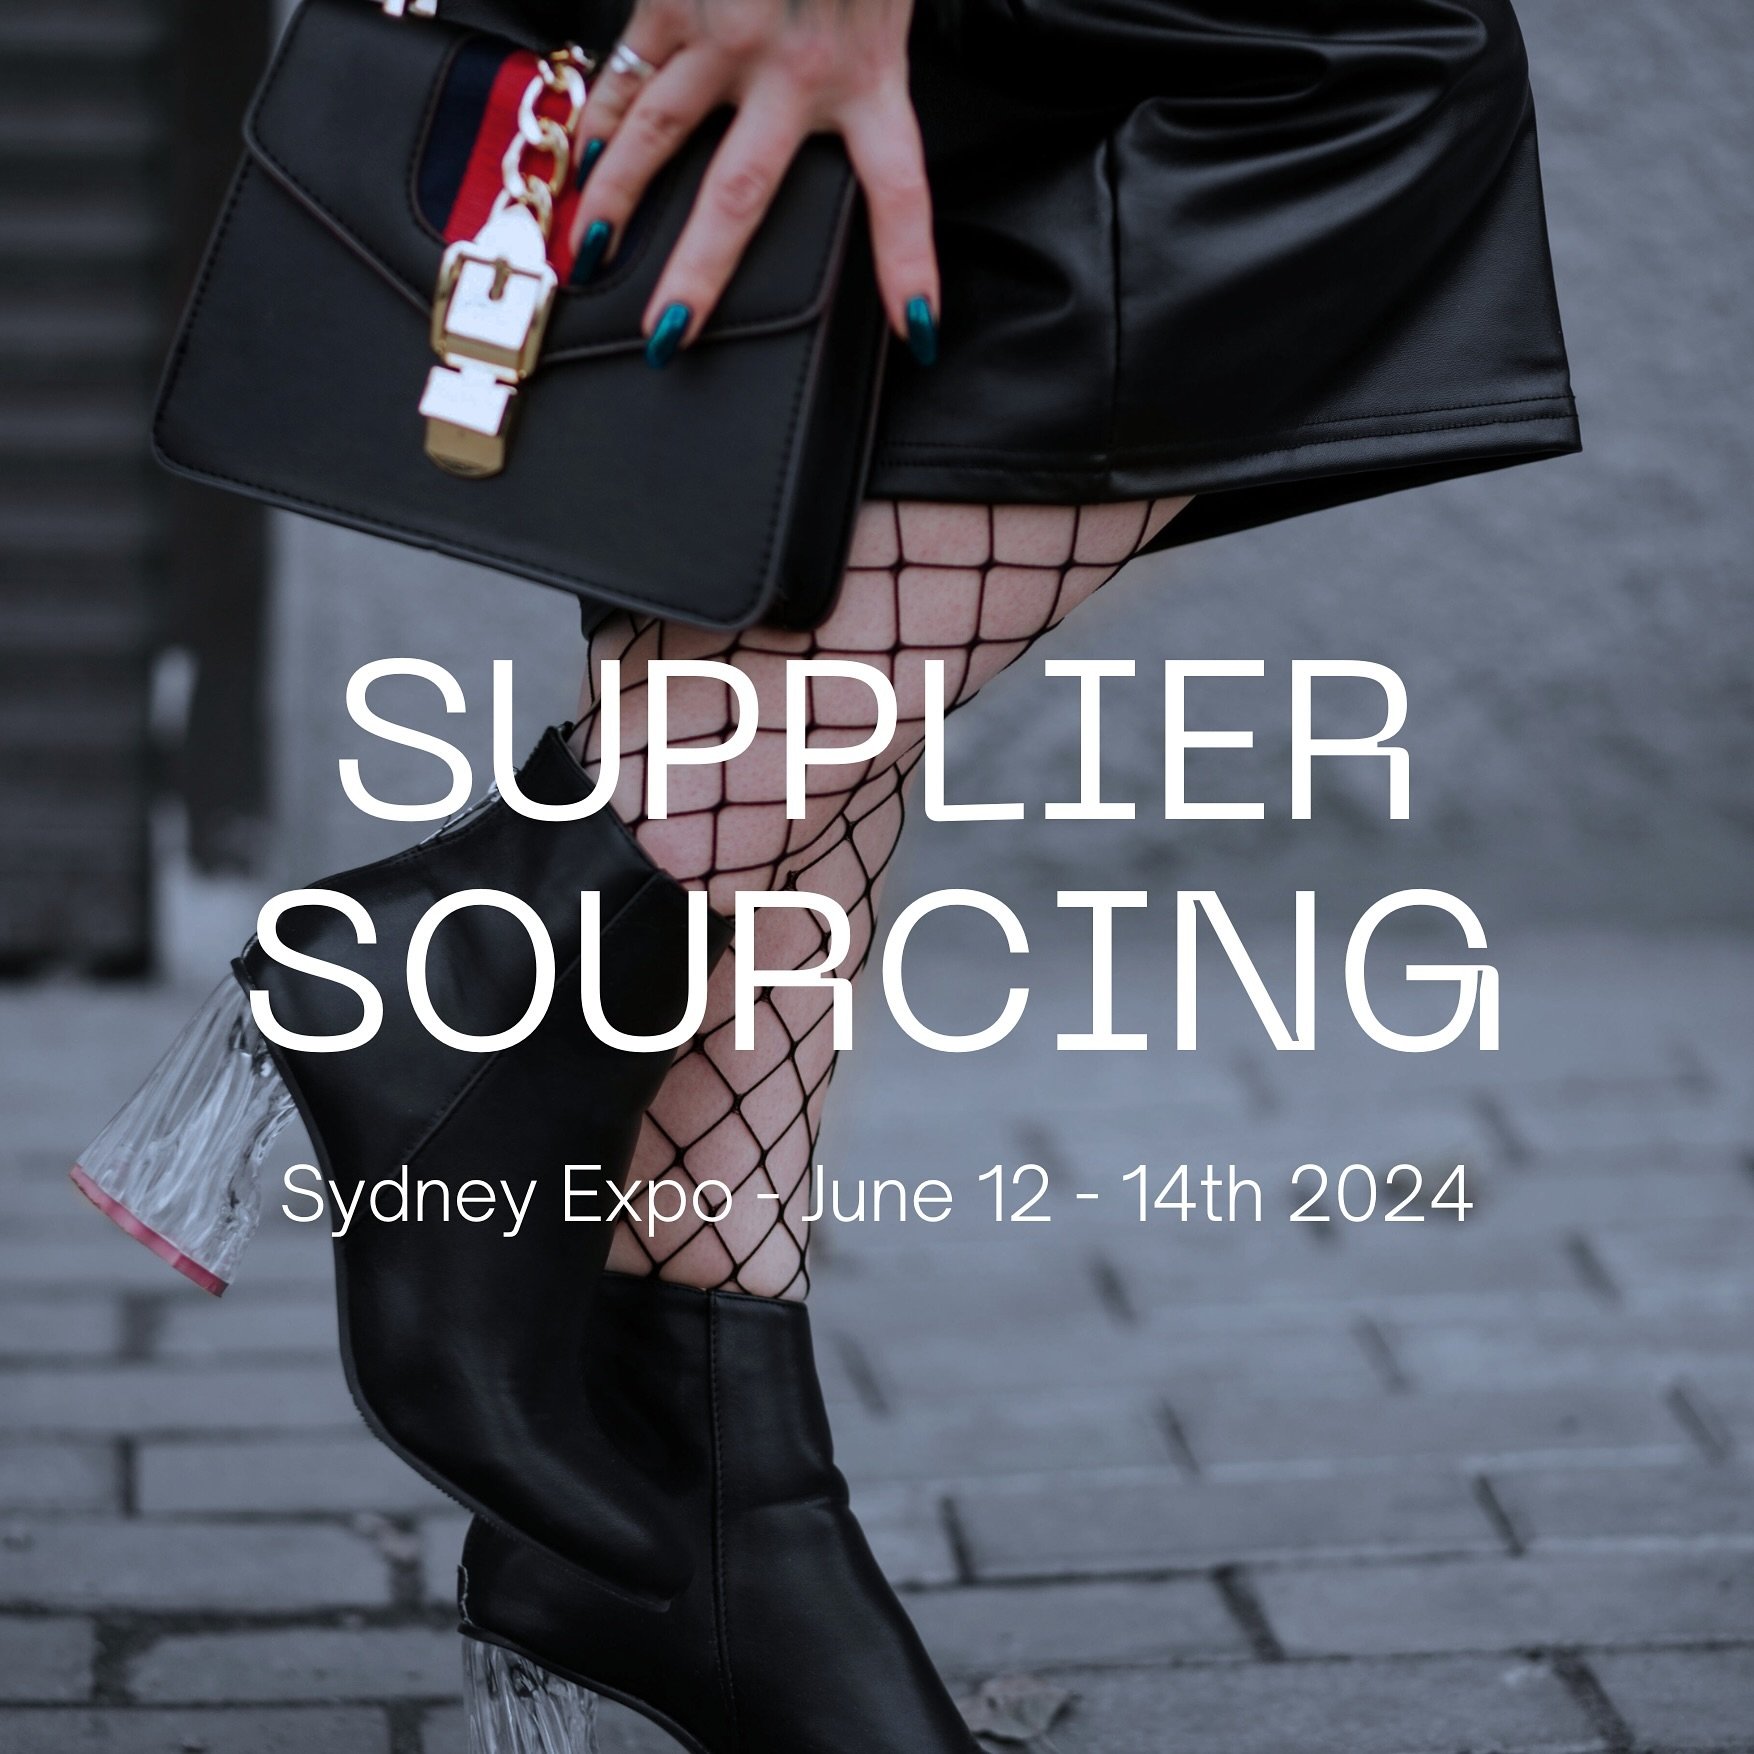 Haven&rsquo;t found your perfect fit supplier yet? Maybe I can help?

After a successful event in Melbourne last year, I&rsquo;m heading back to the Sydney event in June.  If you have been looking for a new supplier or looking for an additional one, 